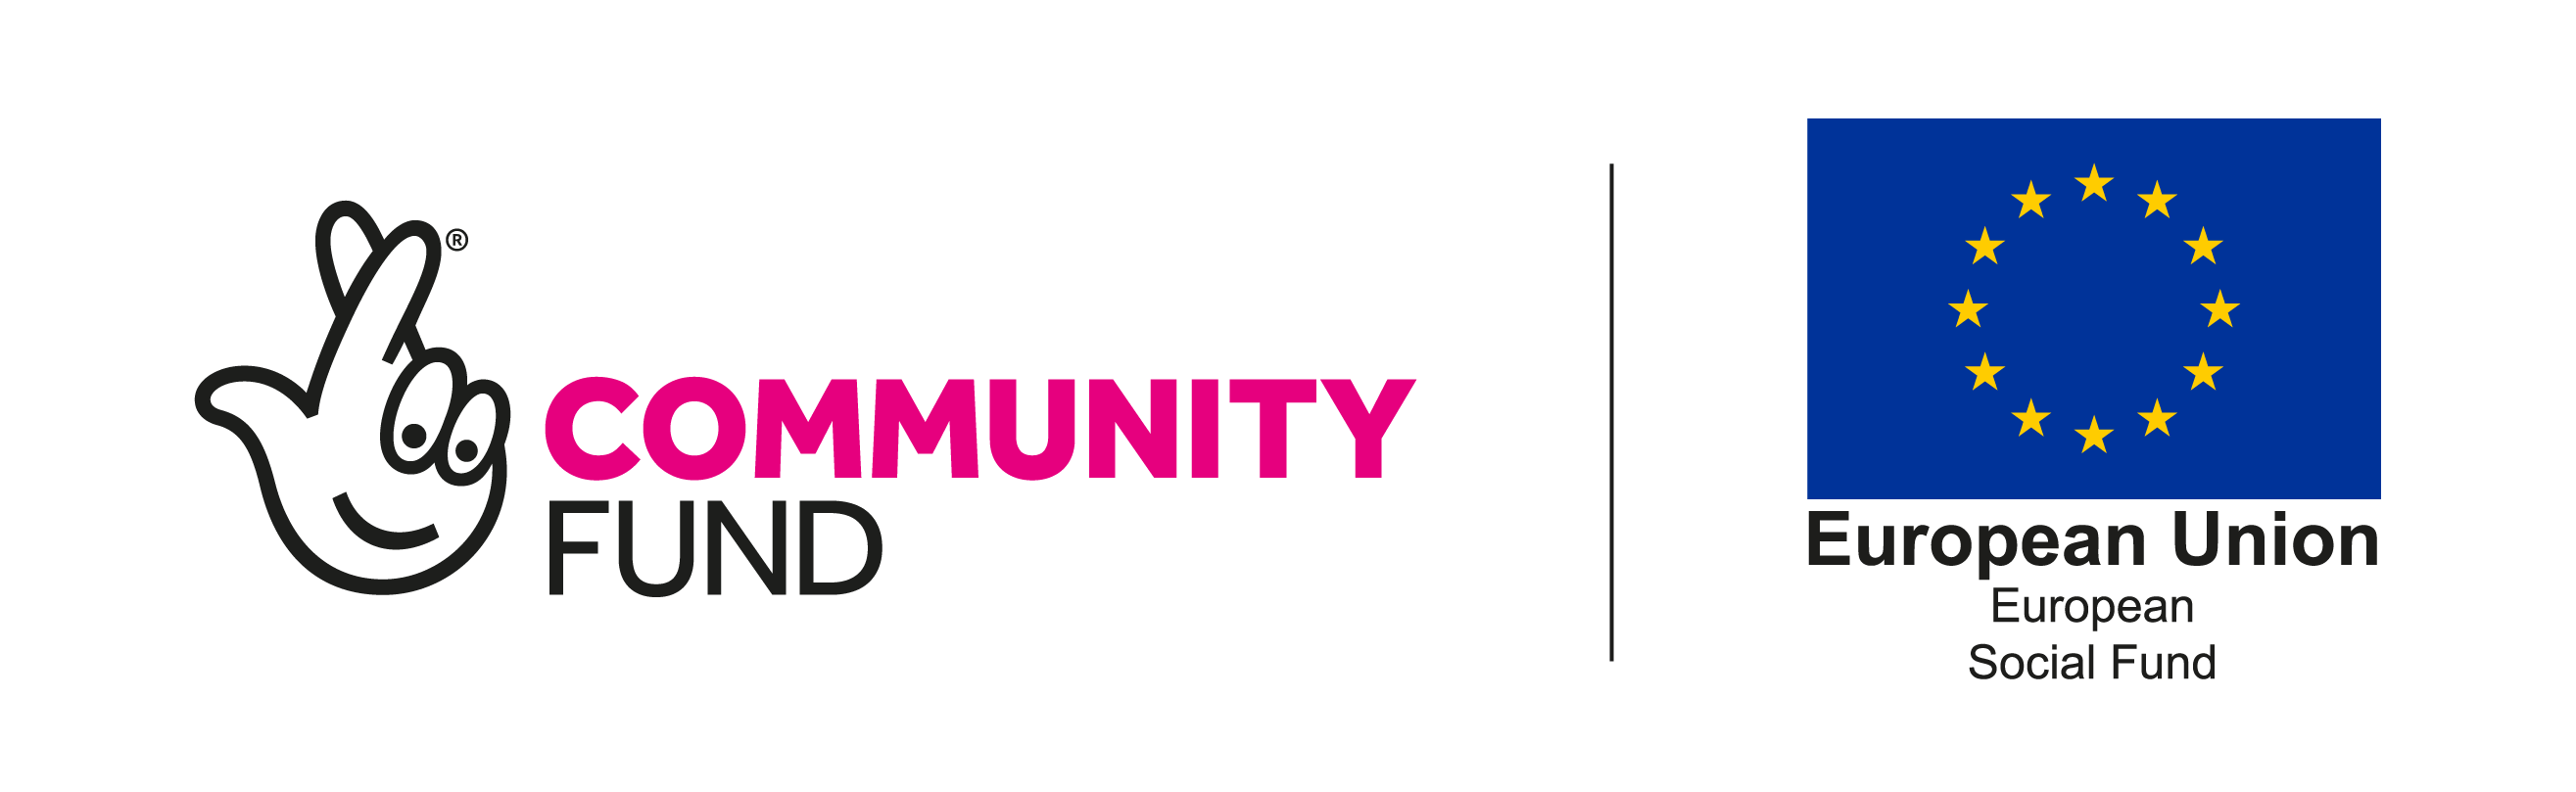 Logos of the national lottery community fund and the european social fund